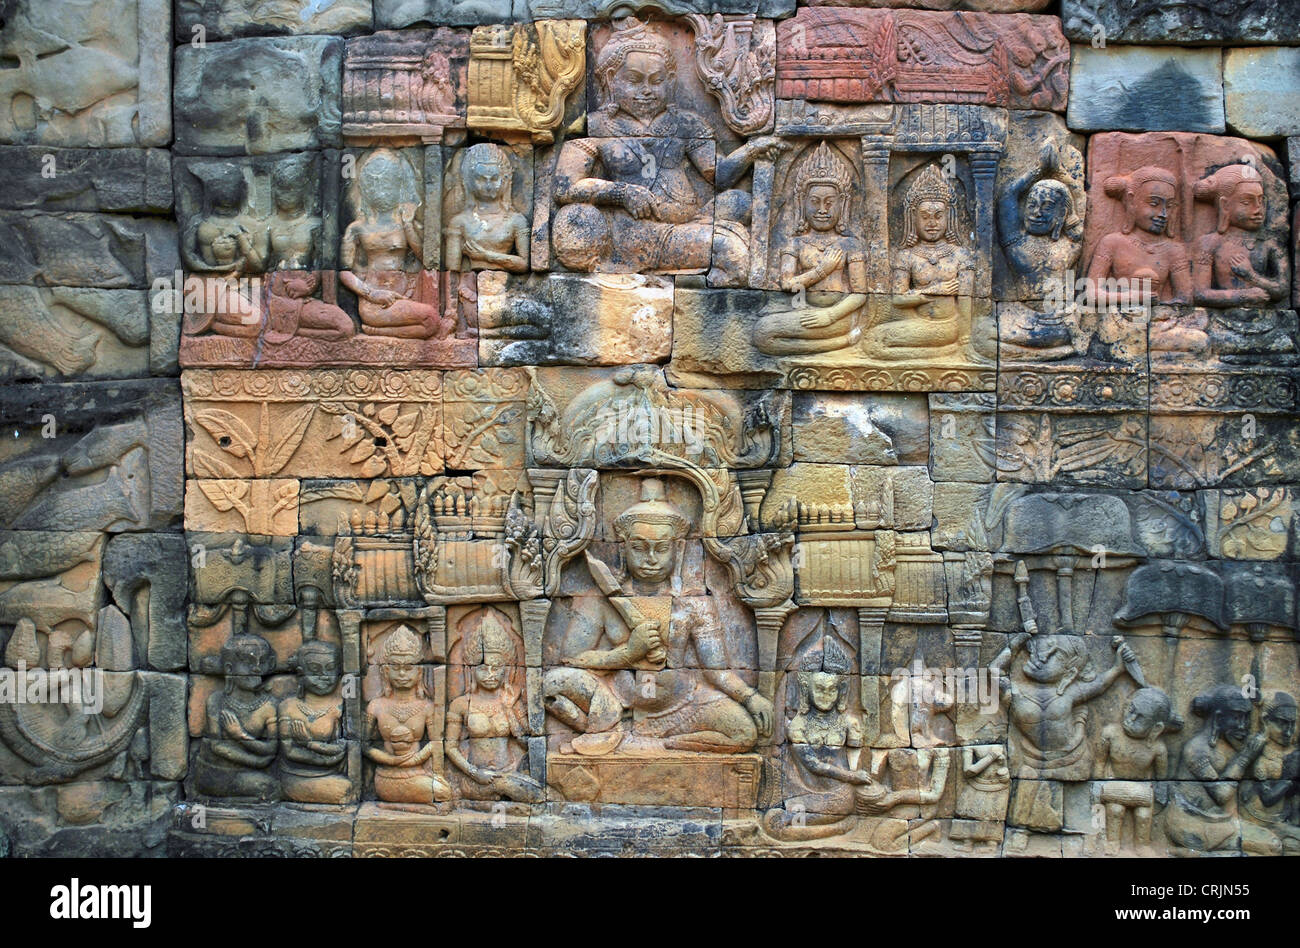 reliefs at the elephant gates at the temple complex Angkor Wat, Cambodia Stock Photo